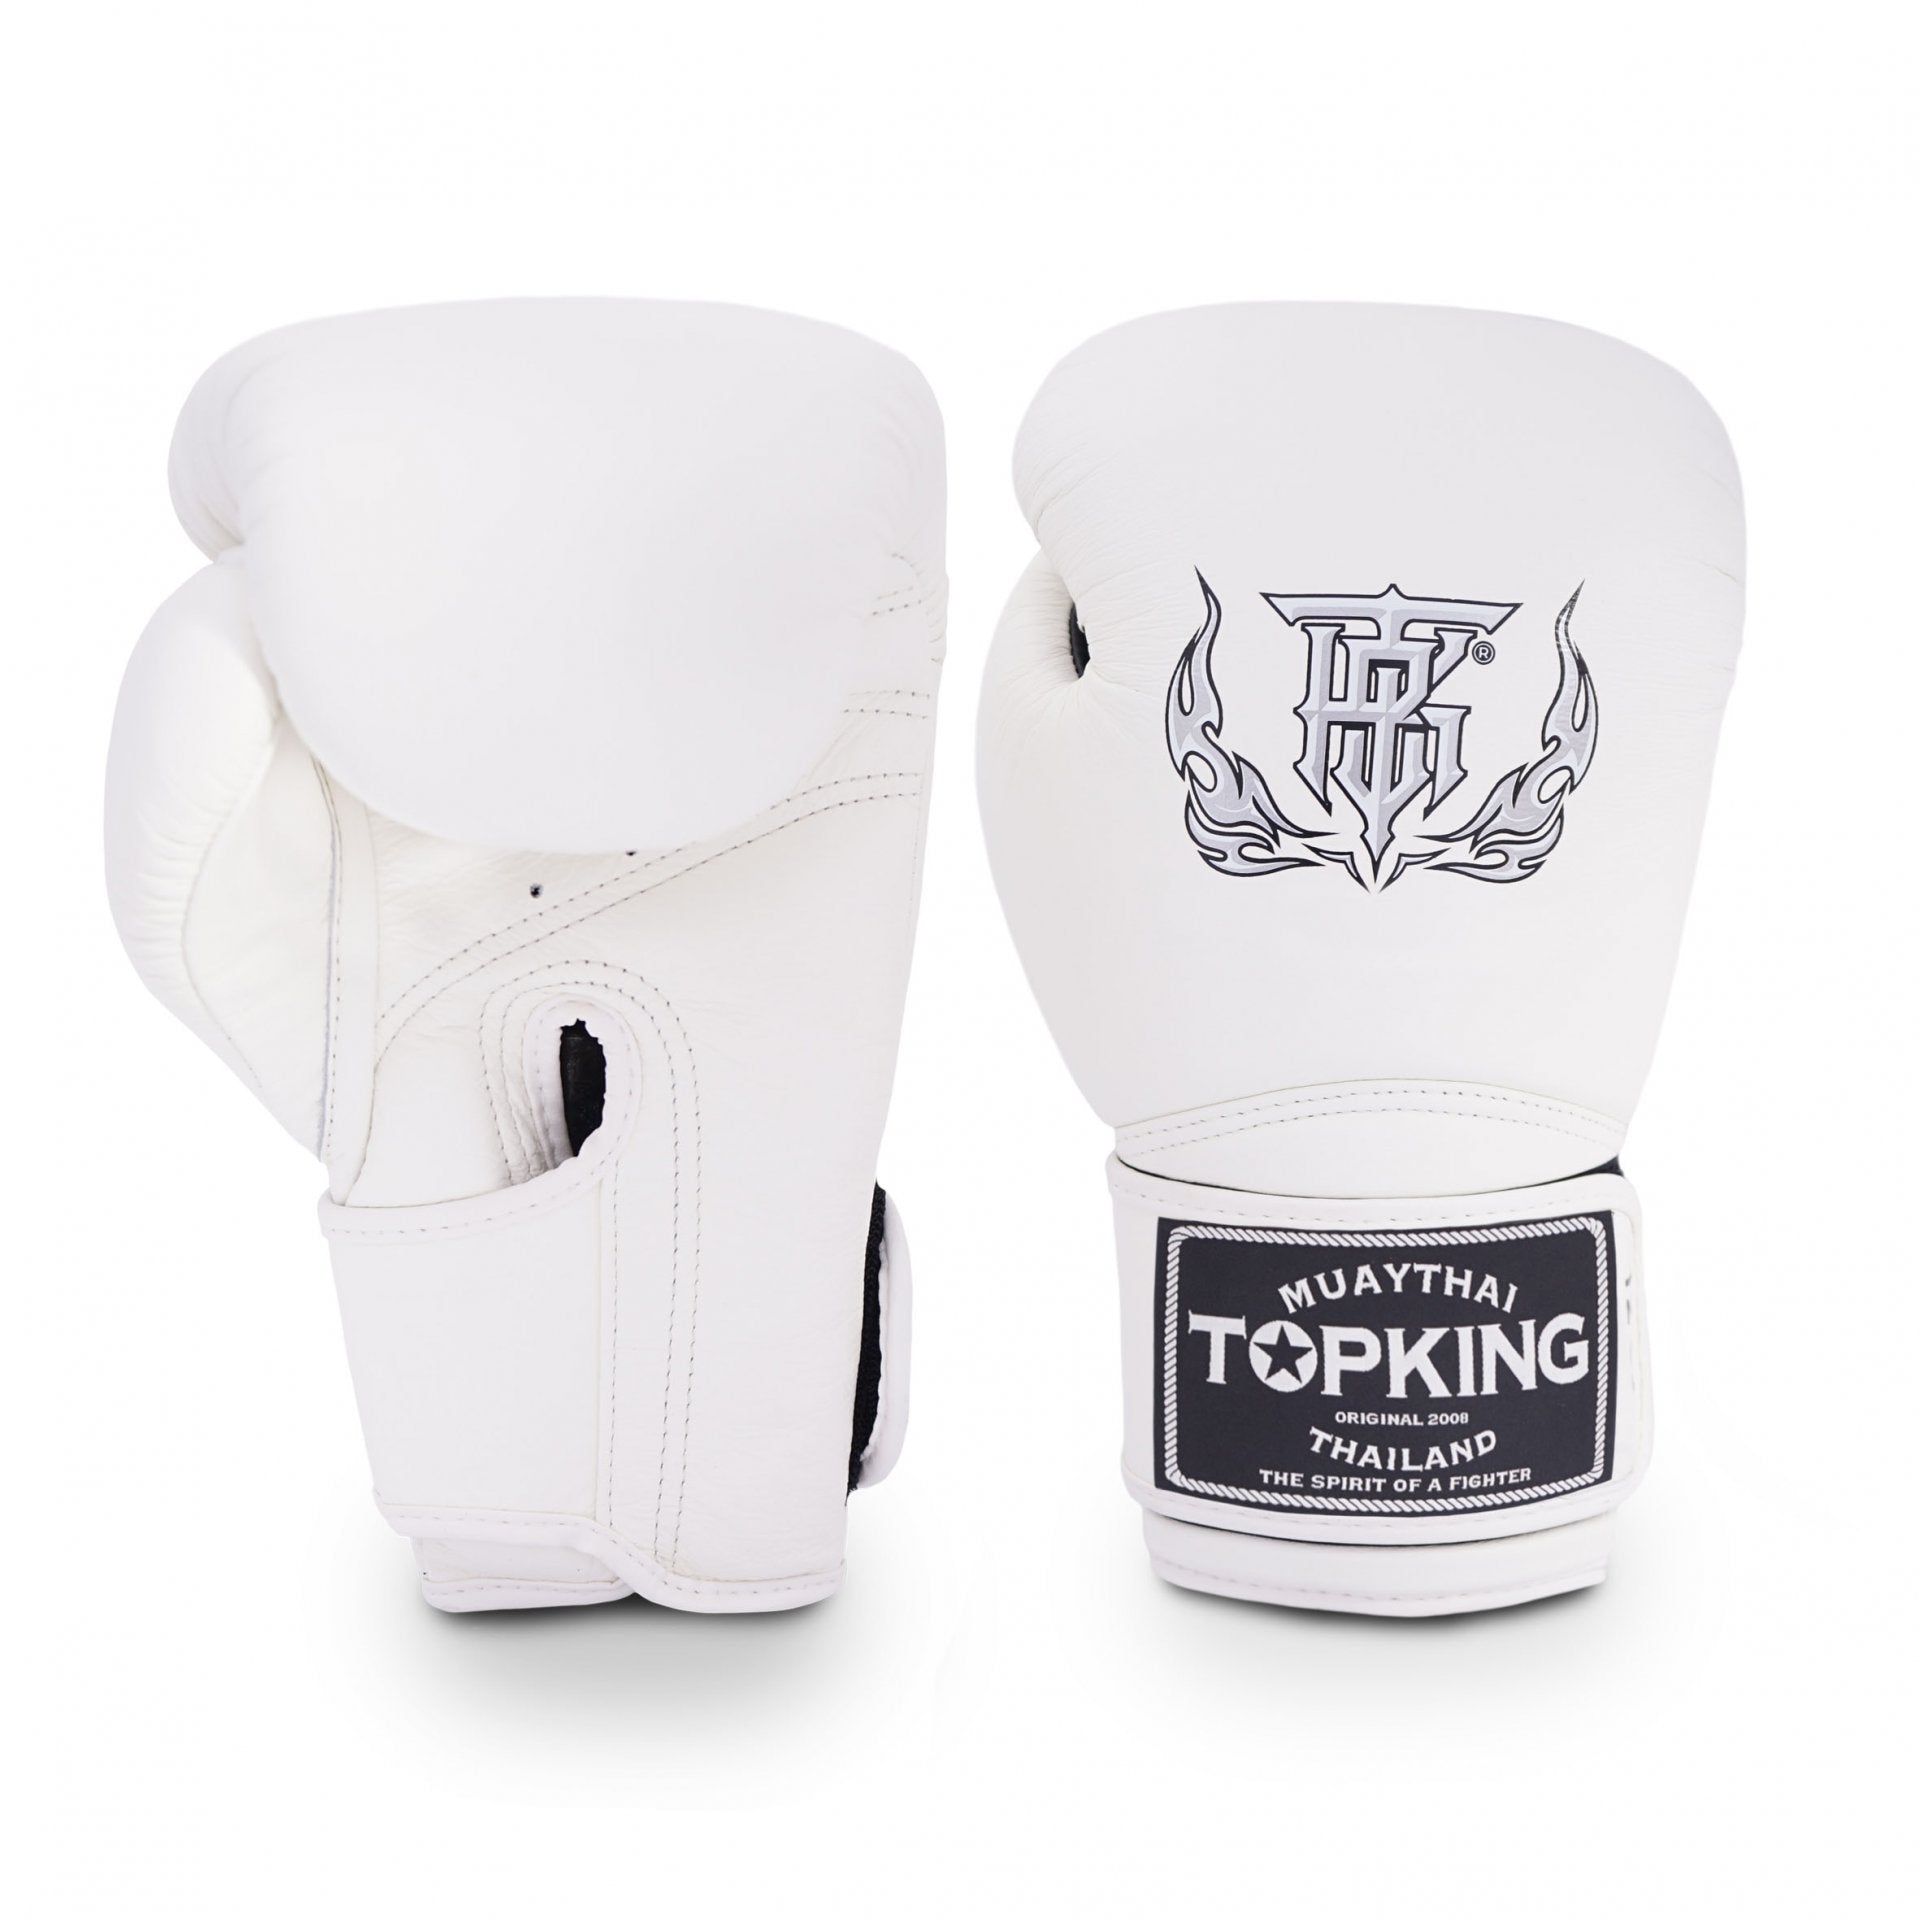 GUANTES BOXEO KING